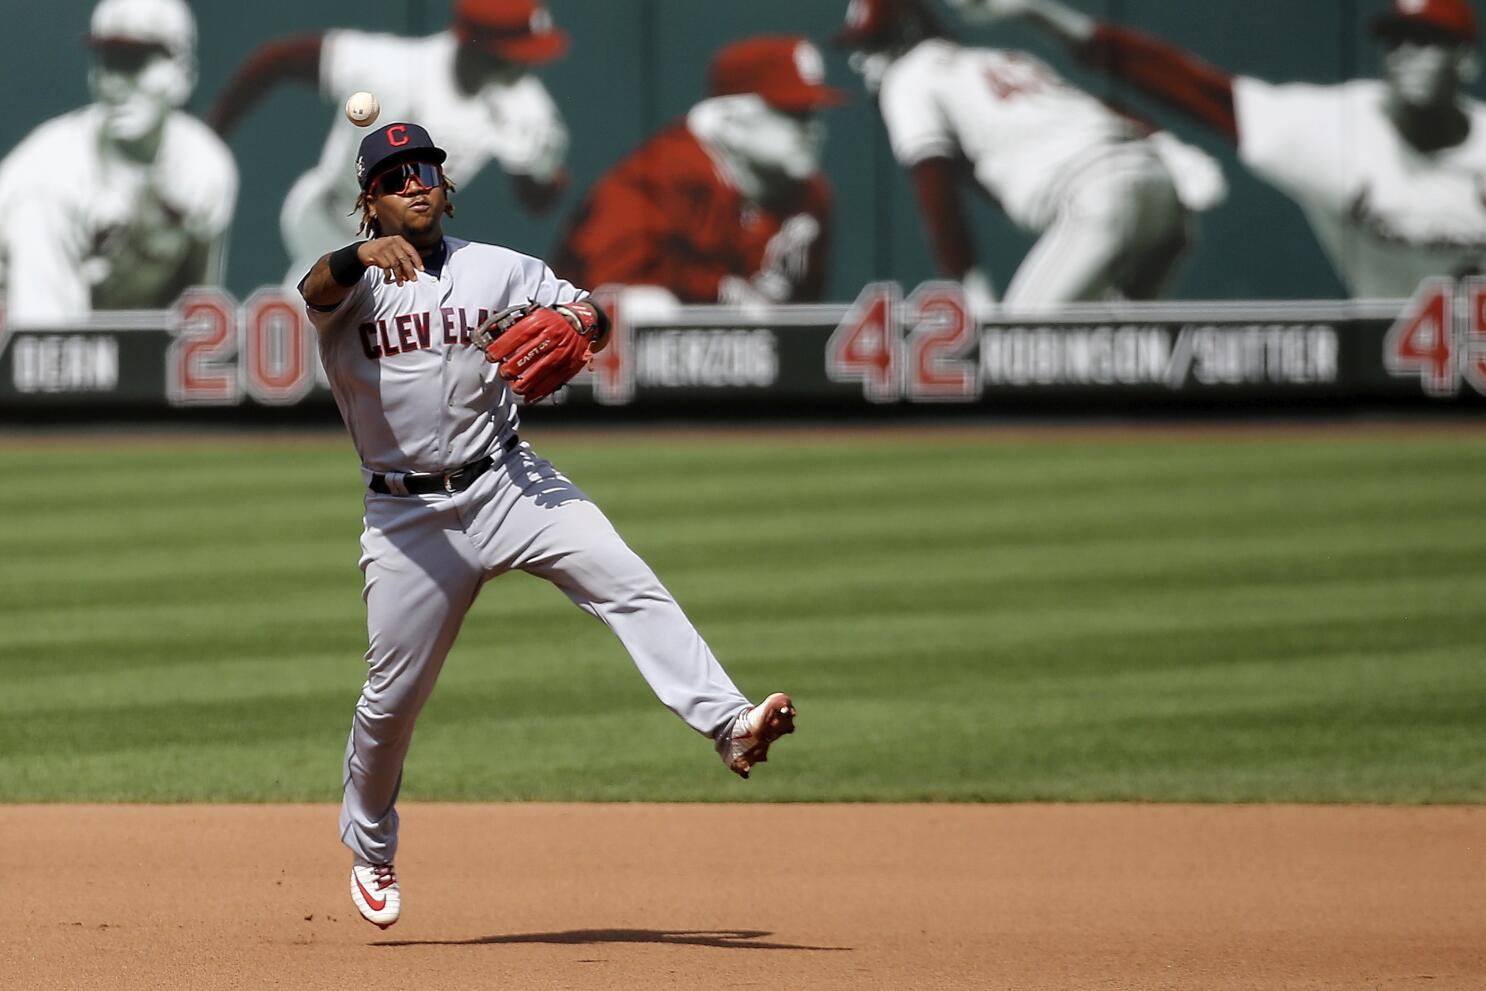 Mets News: Mets acquire Lindor and Carrasco in trade with